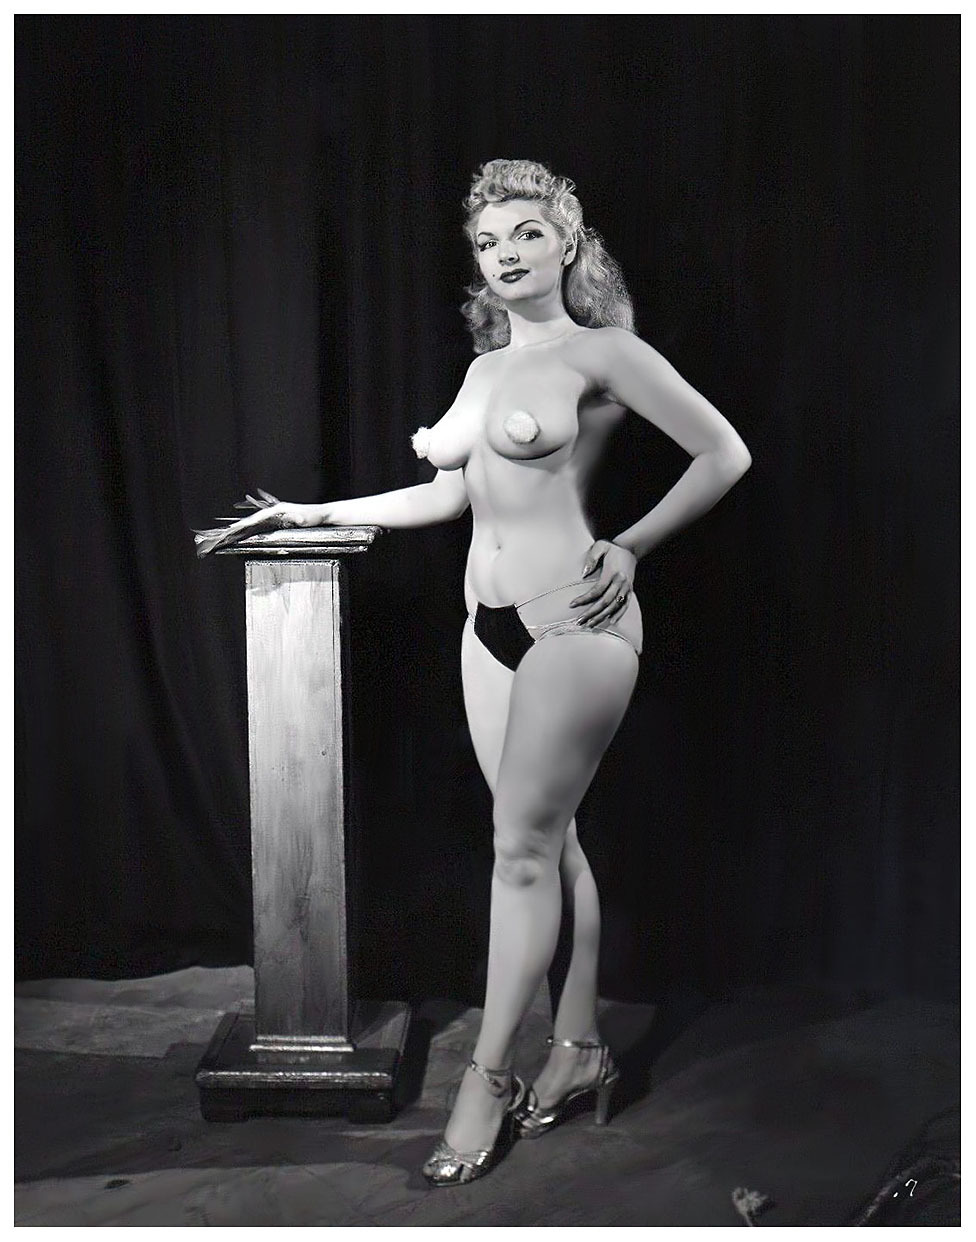 Marlane              (aka. Jean Marlane)Appearing in a publicity still promoting